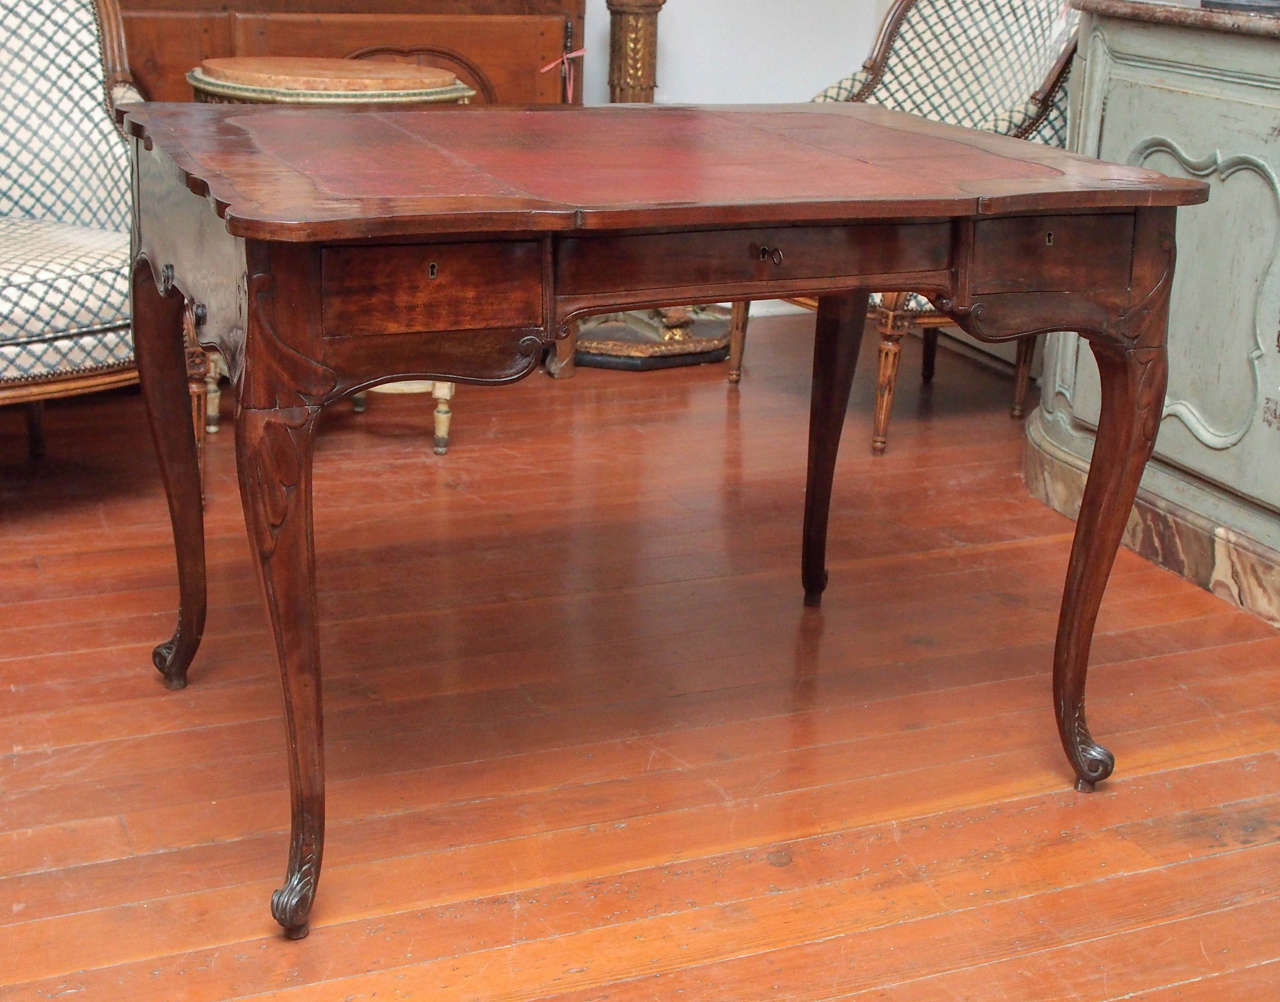 An elegant, well proportioned writing table with tall cabriole legs ending in finely carved snail toe feet, the original, tooled leather and walnut veneered top over three drawers, the apron and front shaped.  This finely made piece has been loving